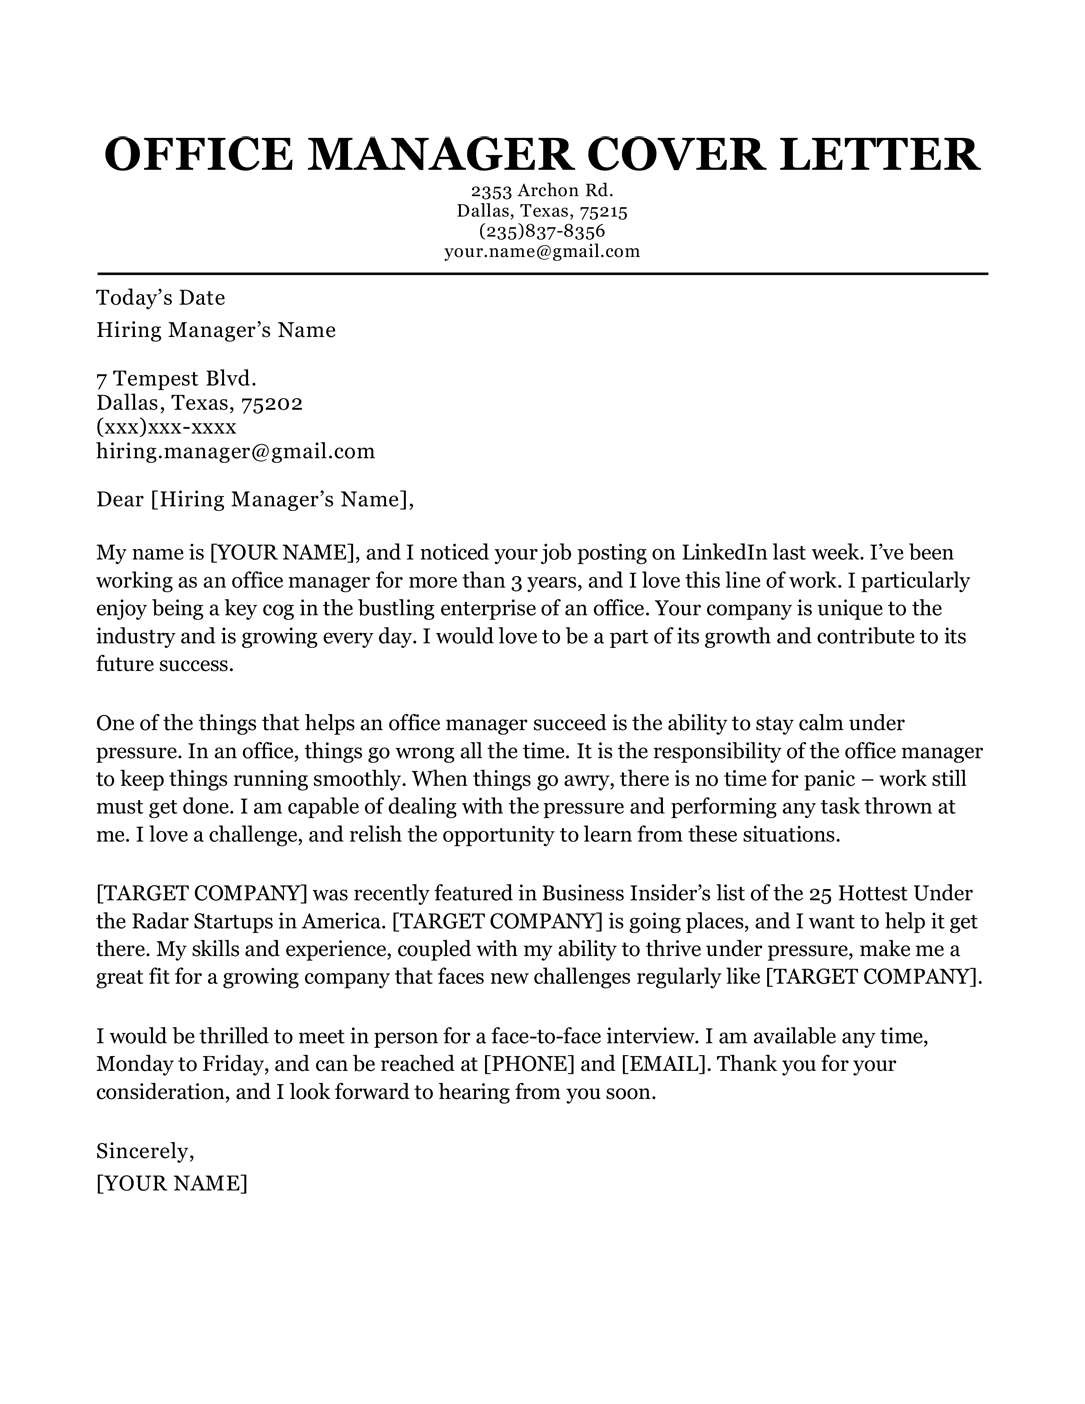 Office manager cover letter sample